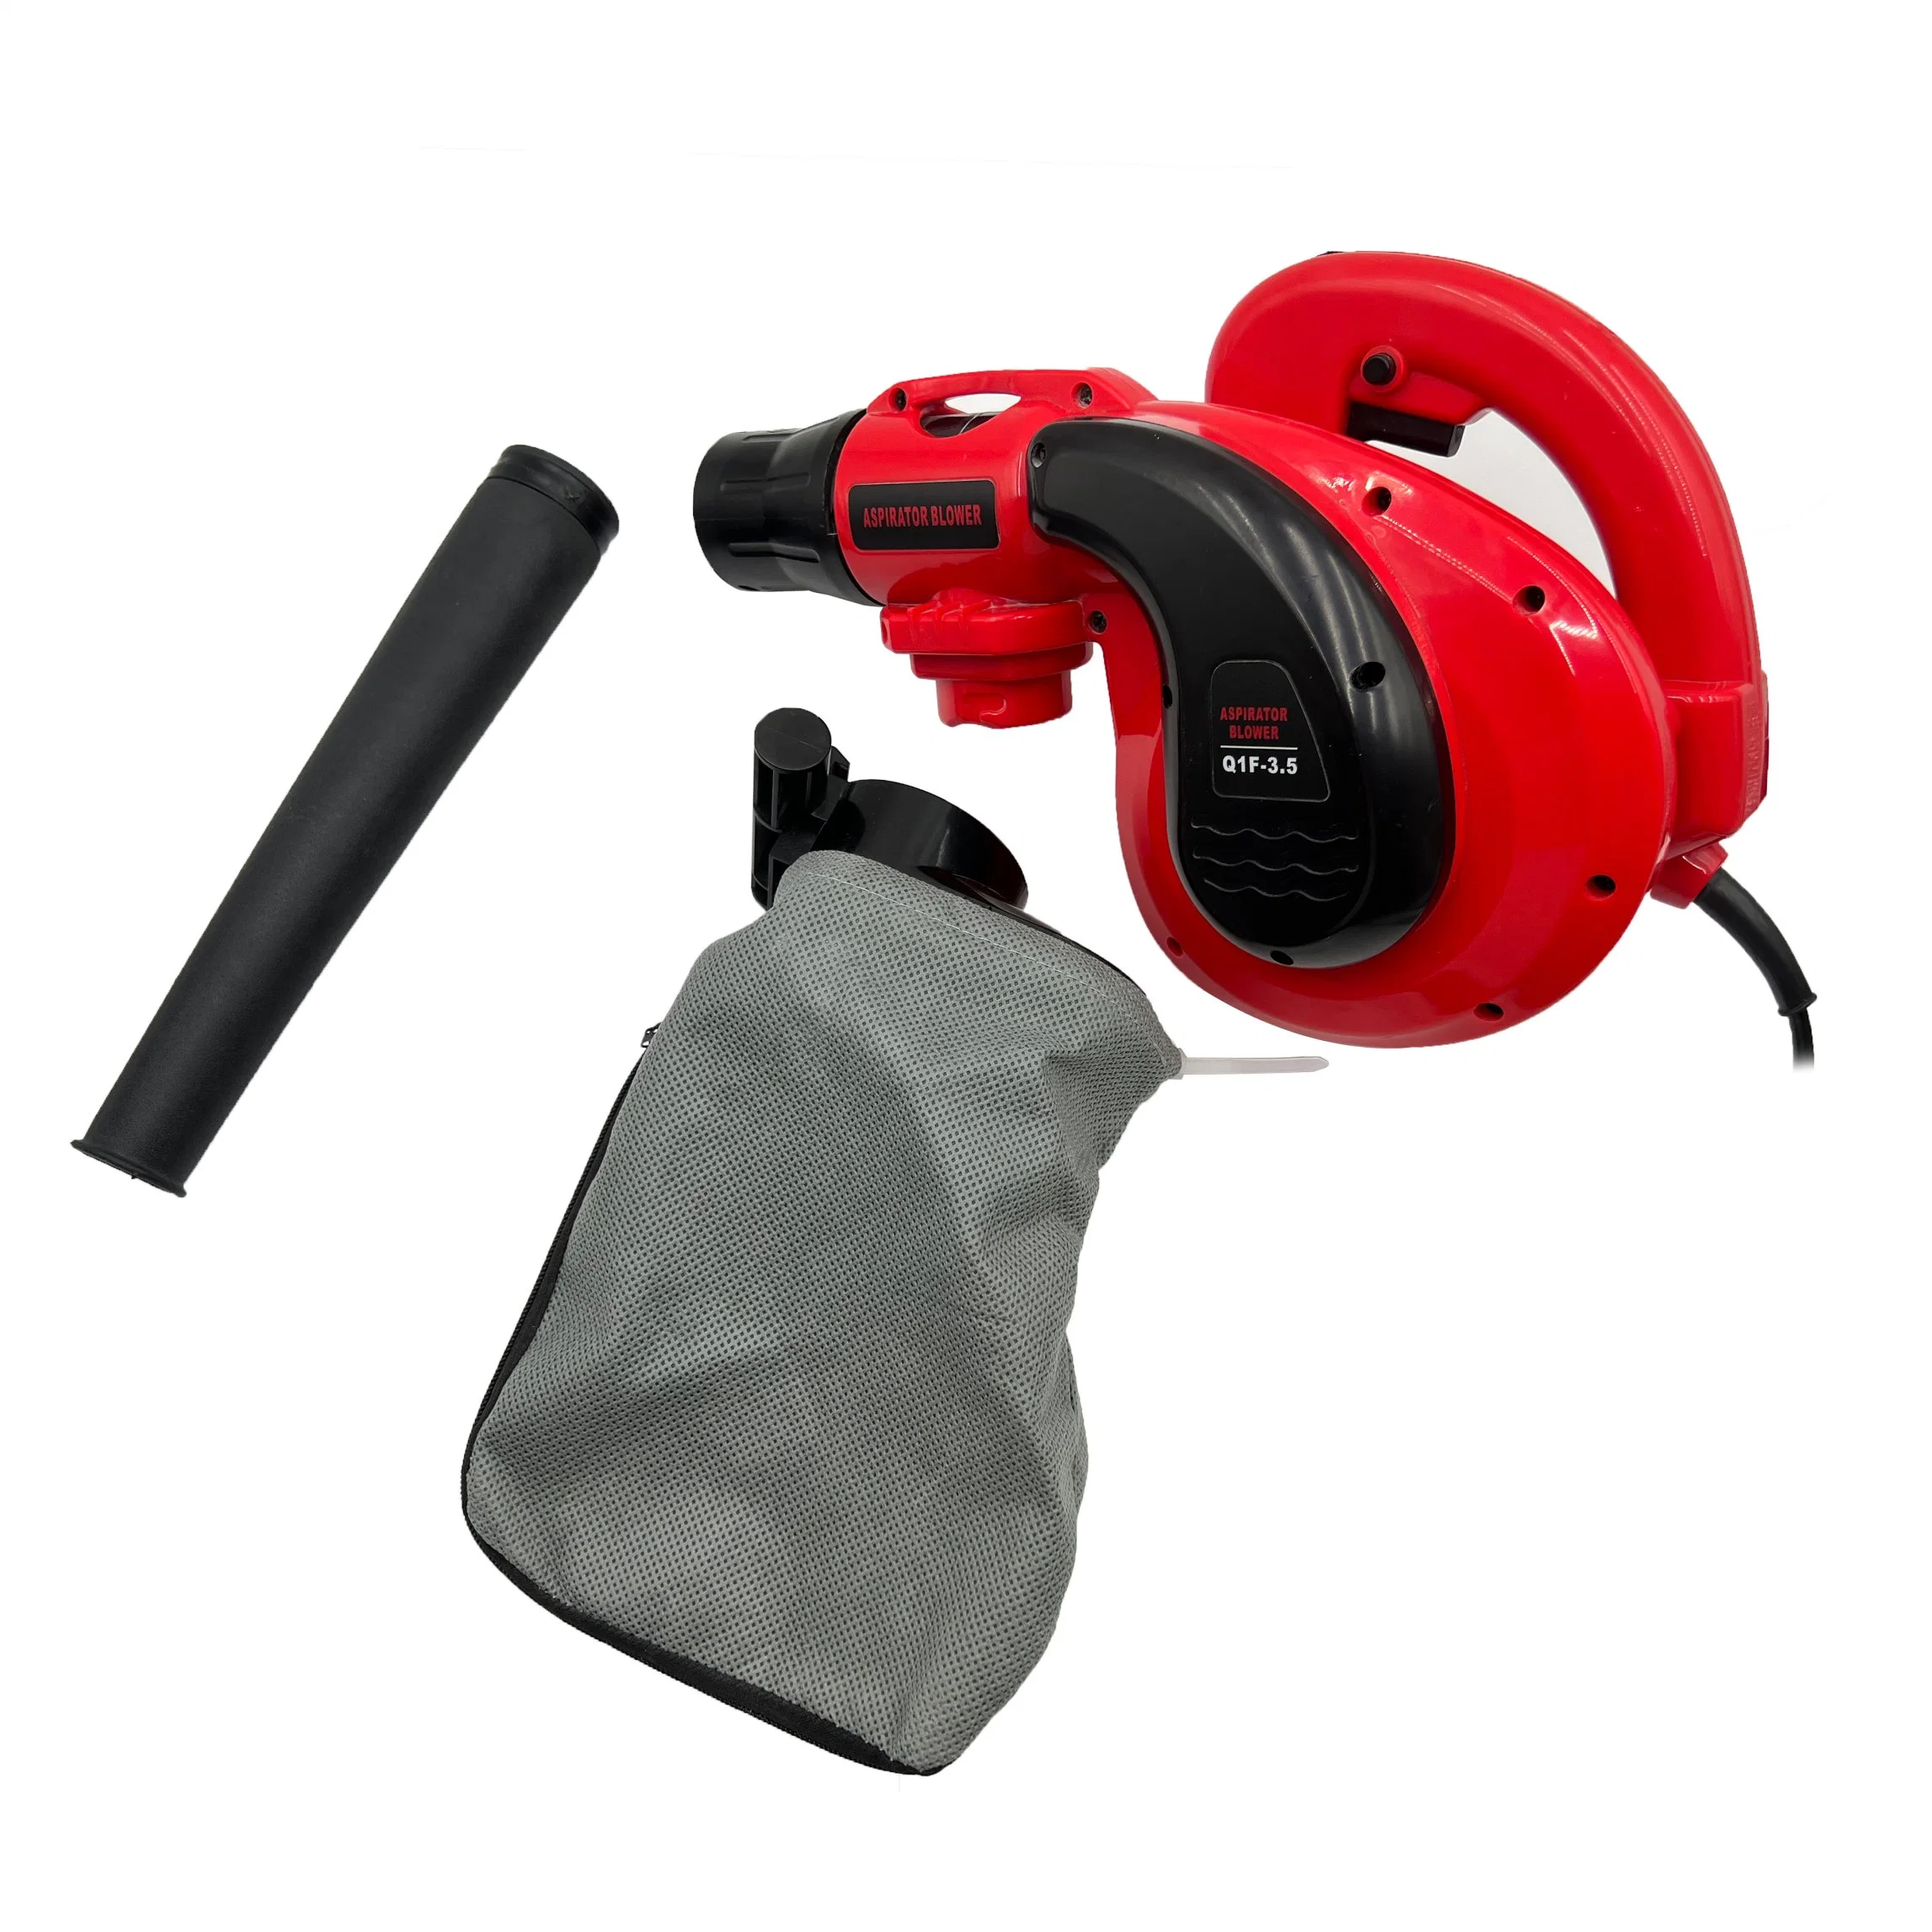 Corded Blower Garden Tools Leaf Electric Blower Power Tool